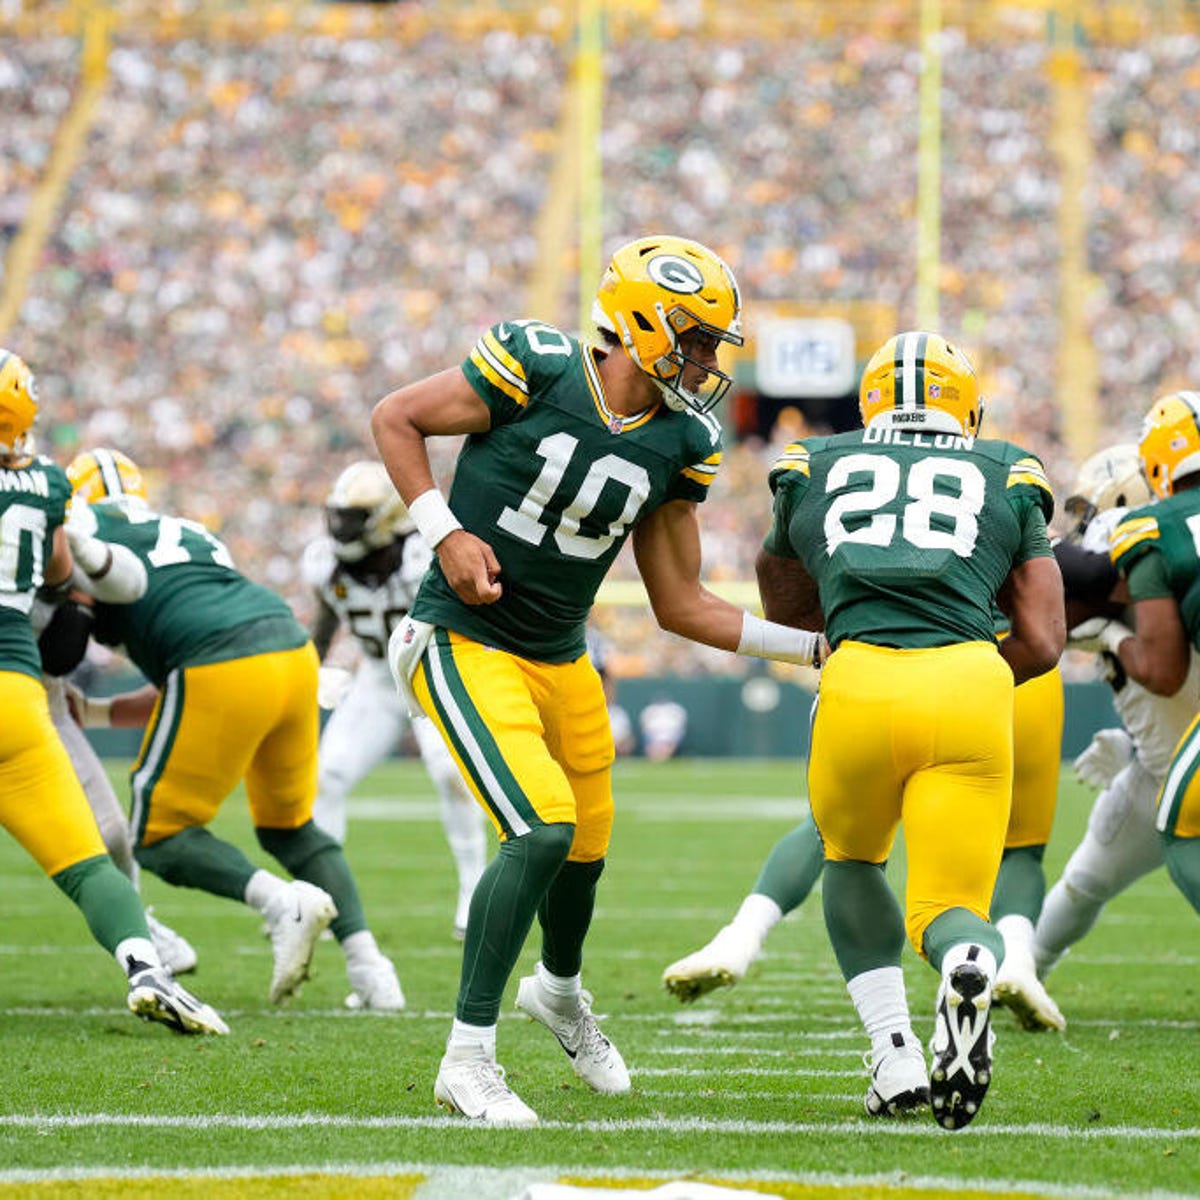 packers vs 49ers live stream online free